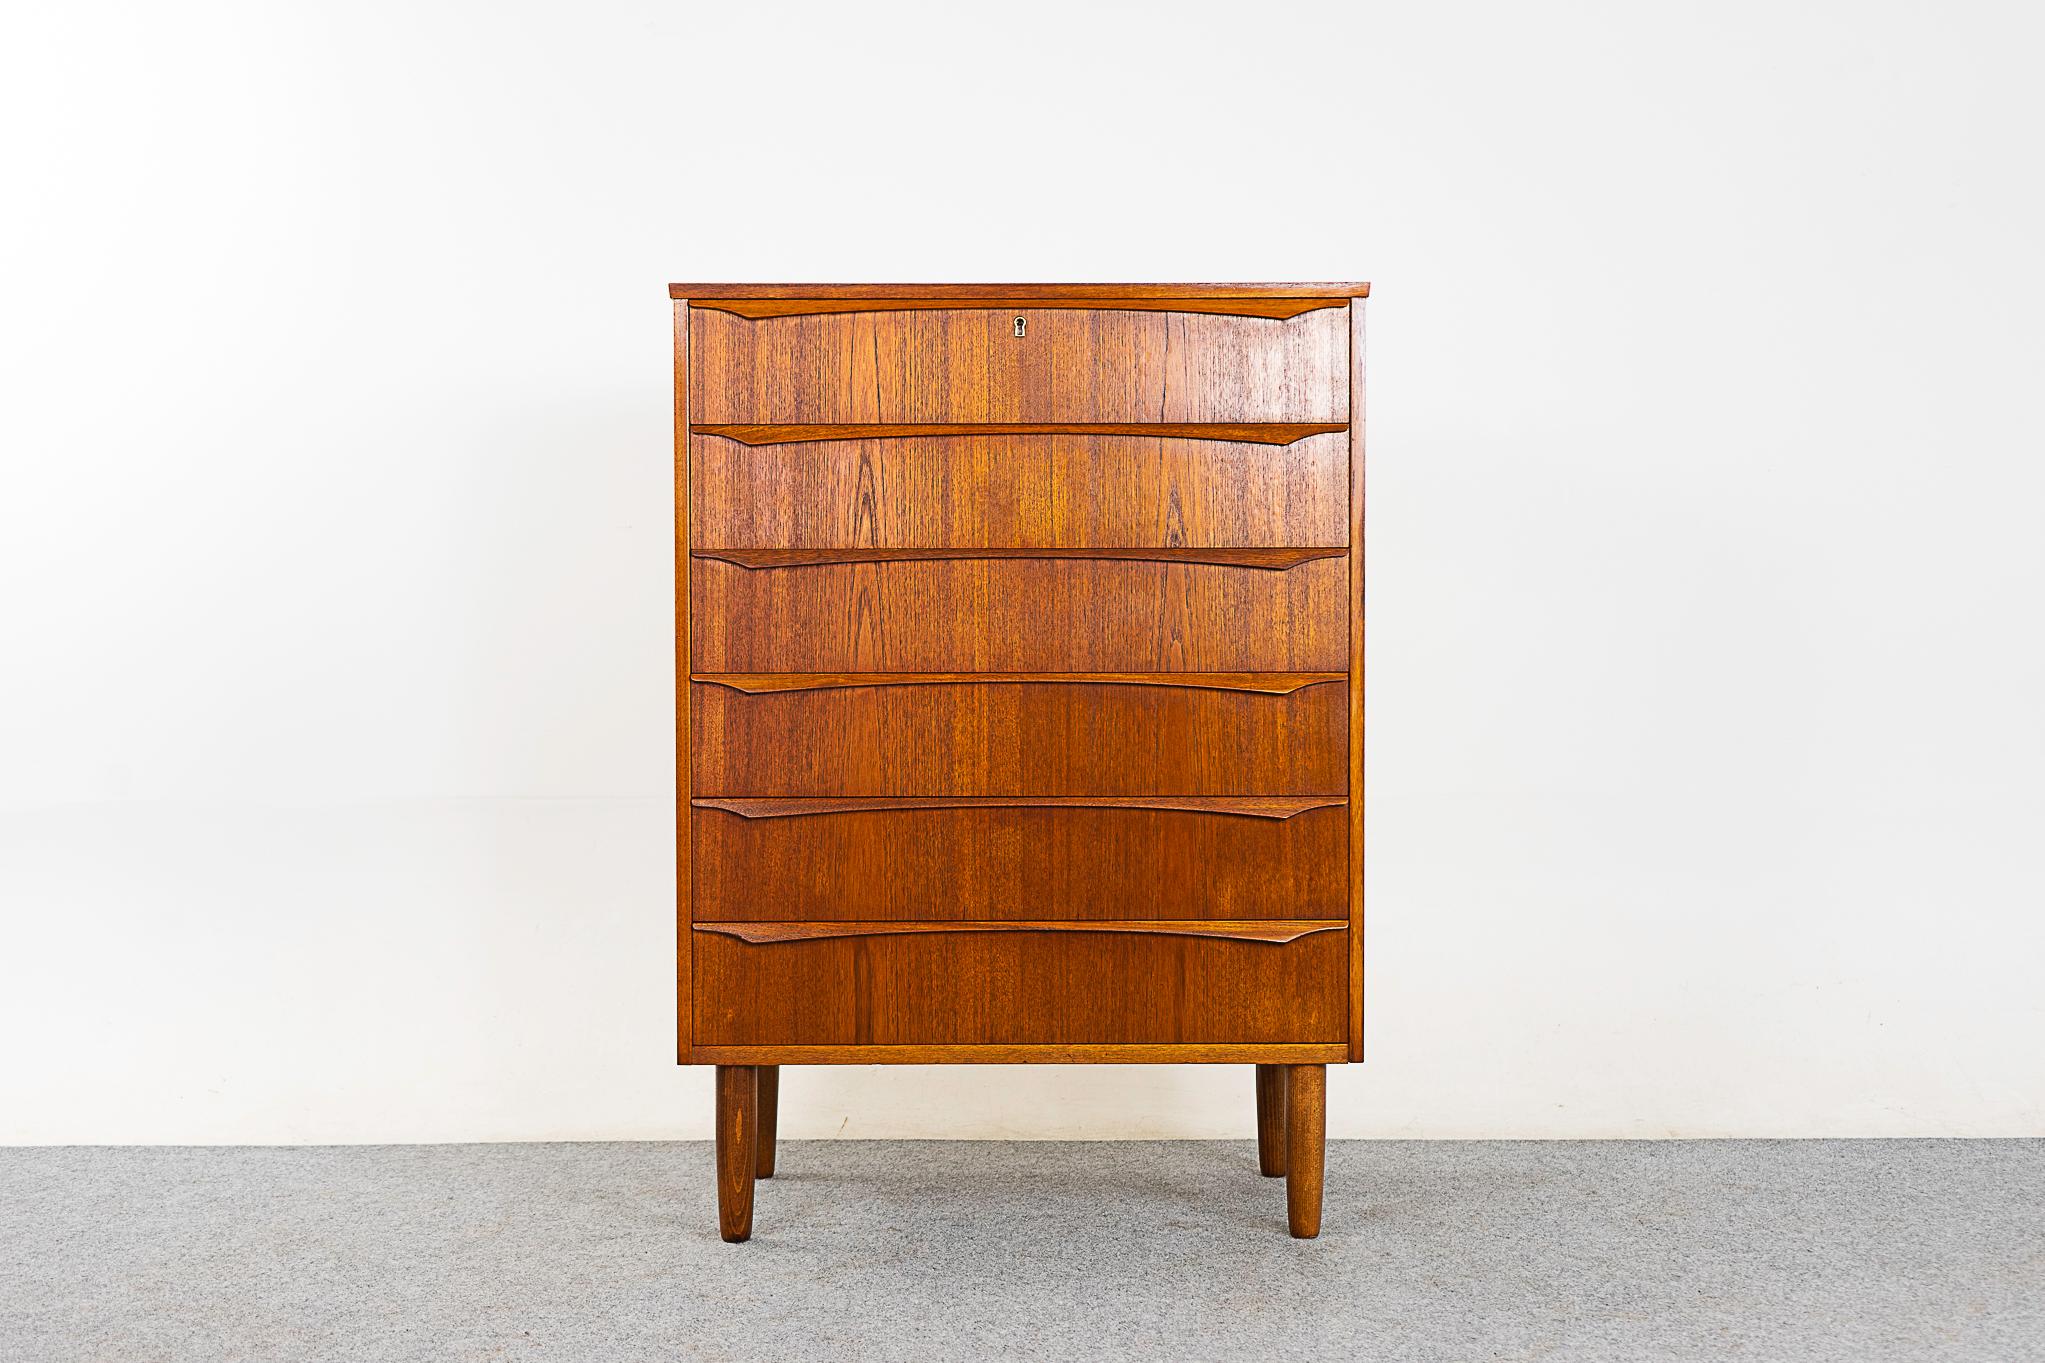 Teak Danish highboy dresser, circa 1960's. Solid wood edging with stunning book-matched veneer on all drawer faces. Integrated, horizontal drawer pulls and dovetail construction! Tapering solid oak legs.

Please inquire for international and remote